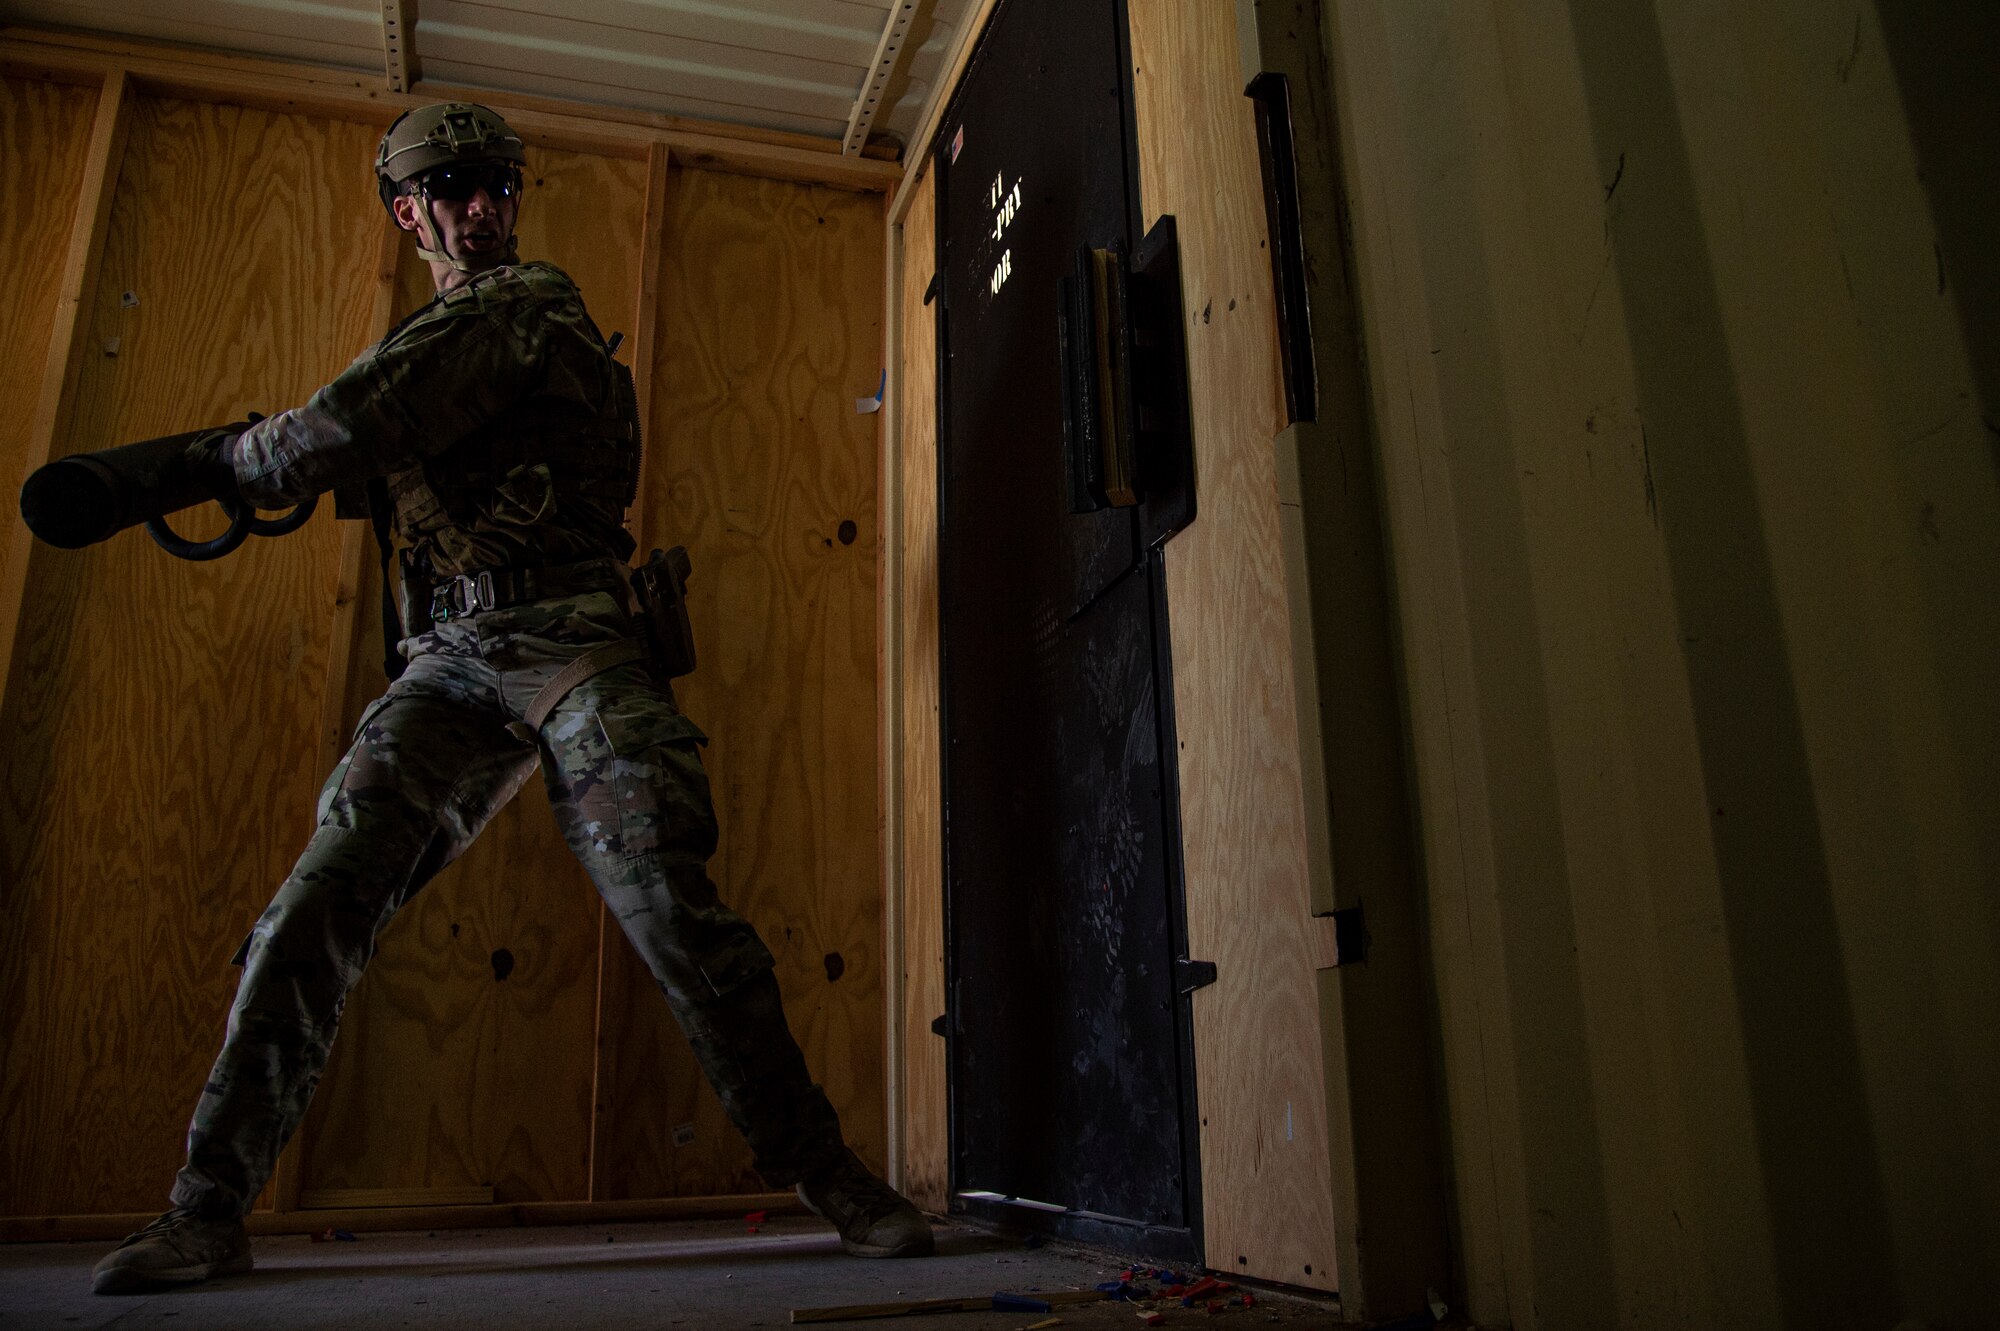 U.S. Air Force Staff Sgt. Chandler Docusen, 49th Security Forces Squadron training instructor, uses a battering ram to breach a door in a breaching exercise during the first-ever-ever Fire Team Leaders Course at Holloman Air Force Base, New Mexico, March 1, 2023. The FTLC course allowed Airmen to learn the basics of breaching entryways with specialized equipment along with the foundational steps to effectively conduct close-quarters combat. (U.S. Air Force photo by Senior Airman Antonio Salfran)